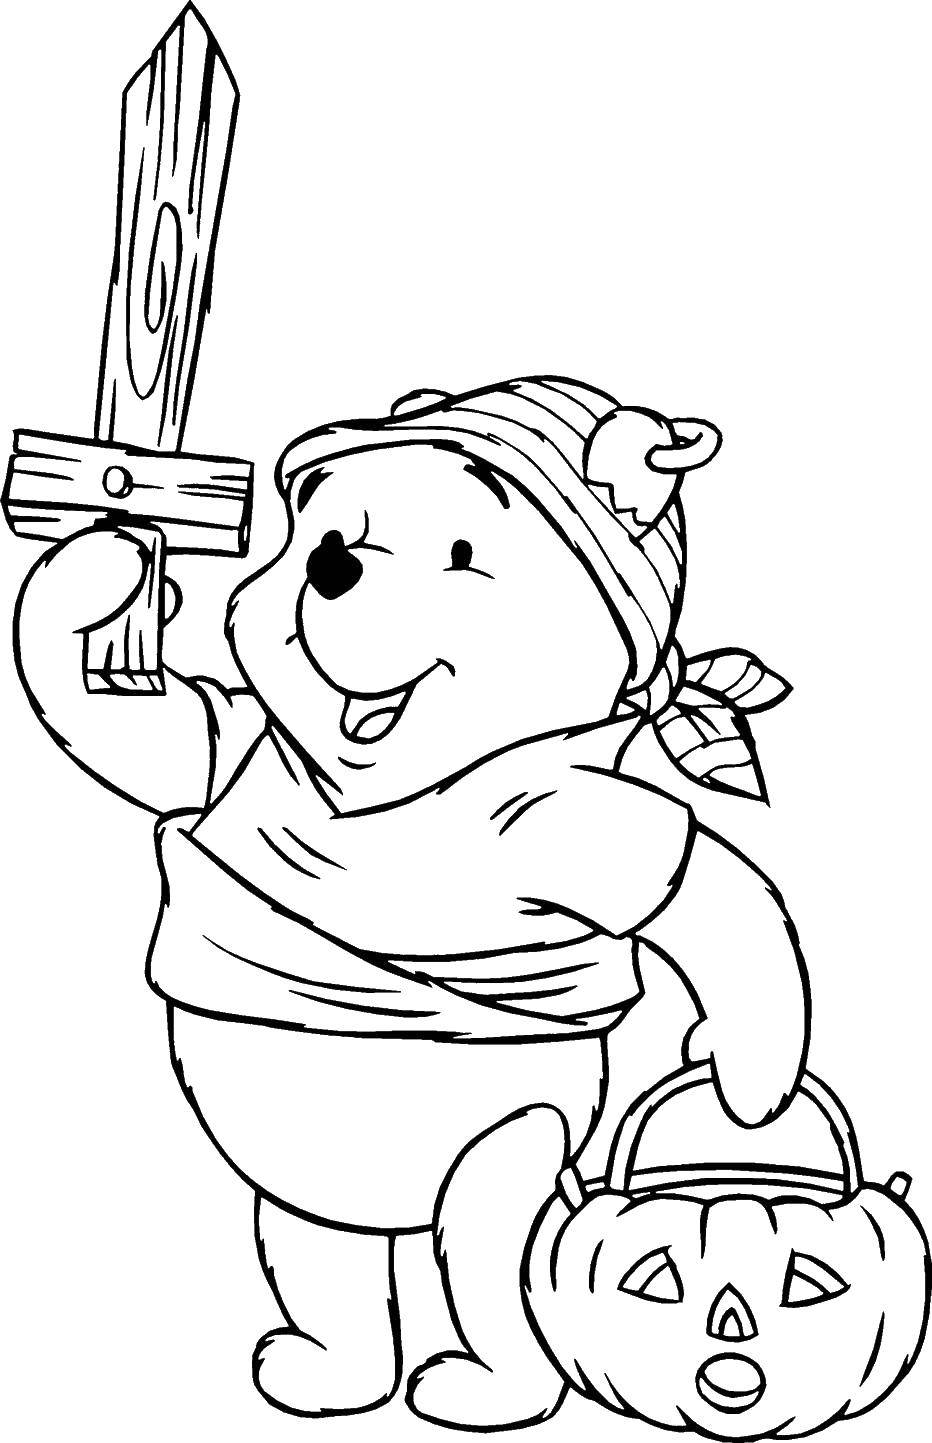 Coloring Winnie the Pooh on Halloween. Category Disney coloring pages. Tags:  Cartoon character, Winnie the Pooh.